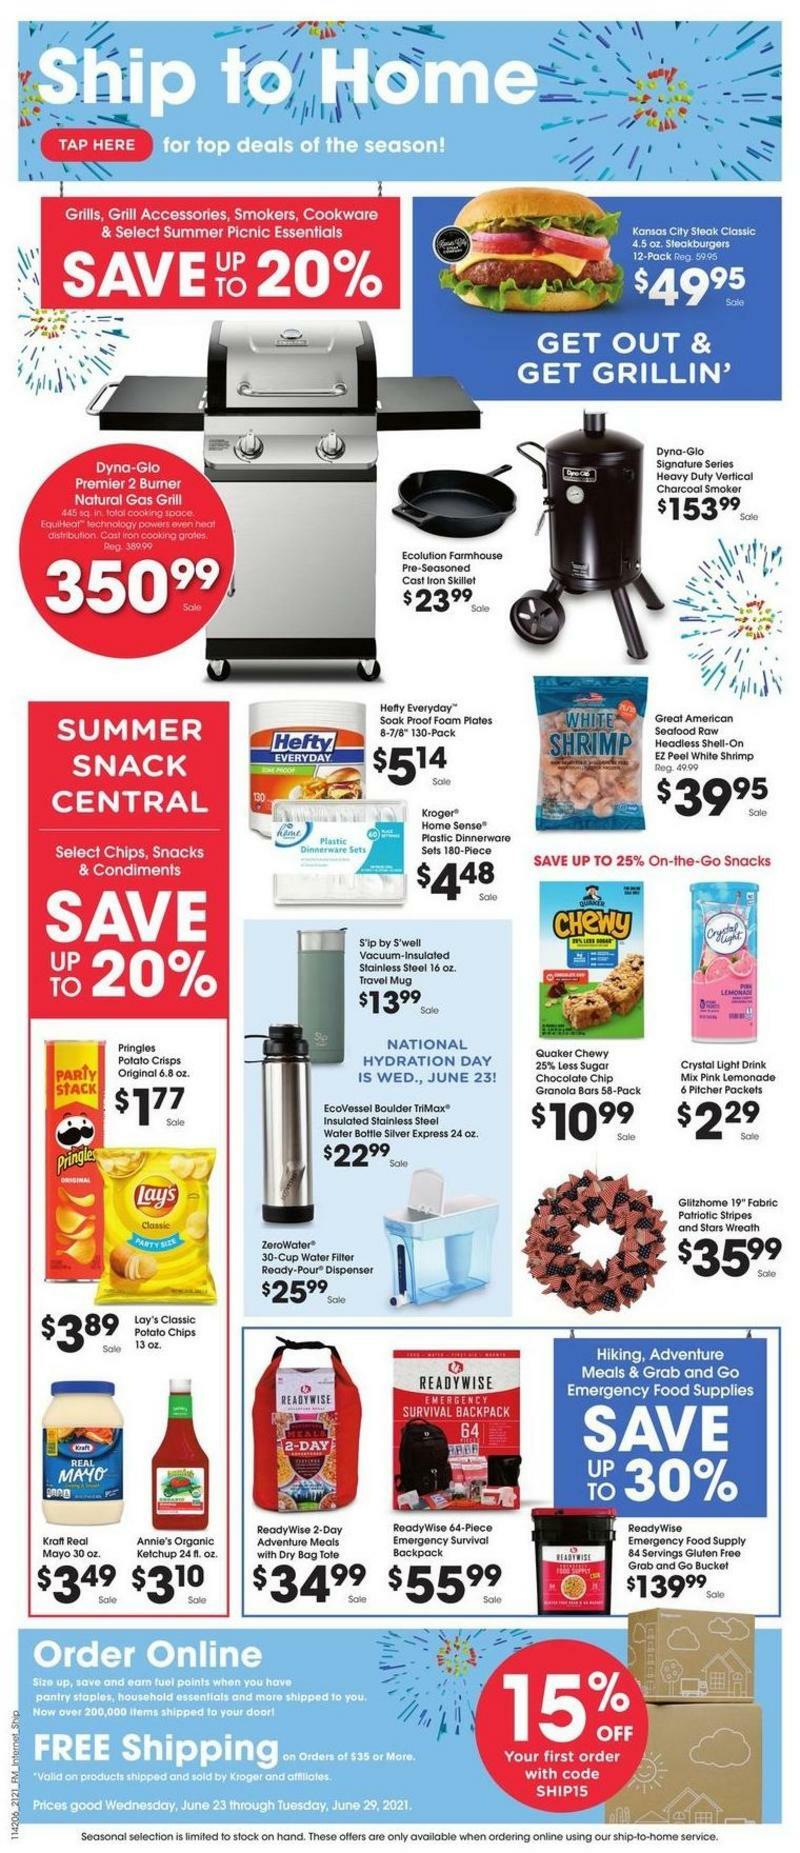 Kroger Ship to Home Weekly Ad from June 23